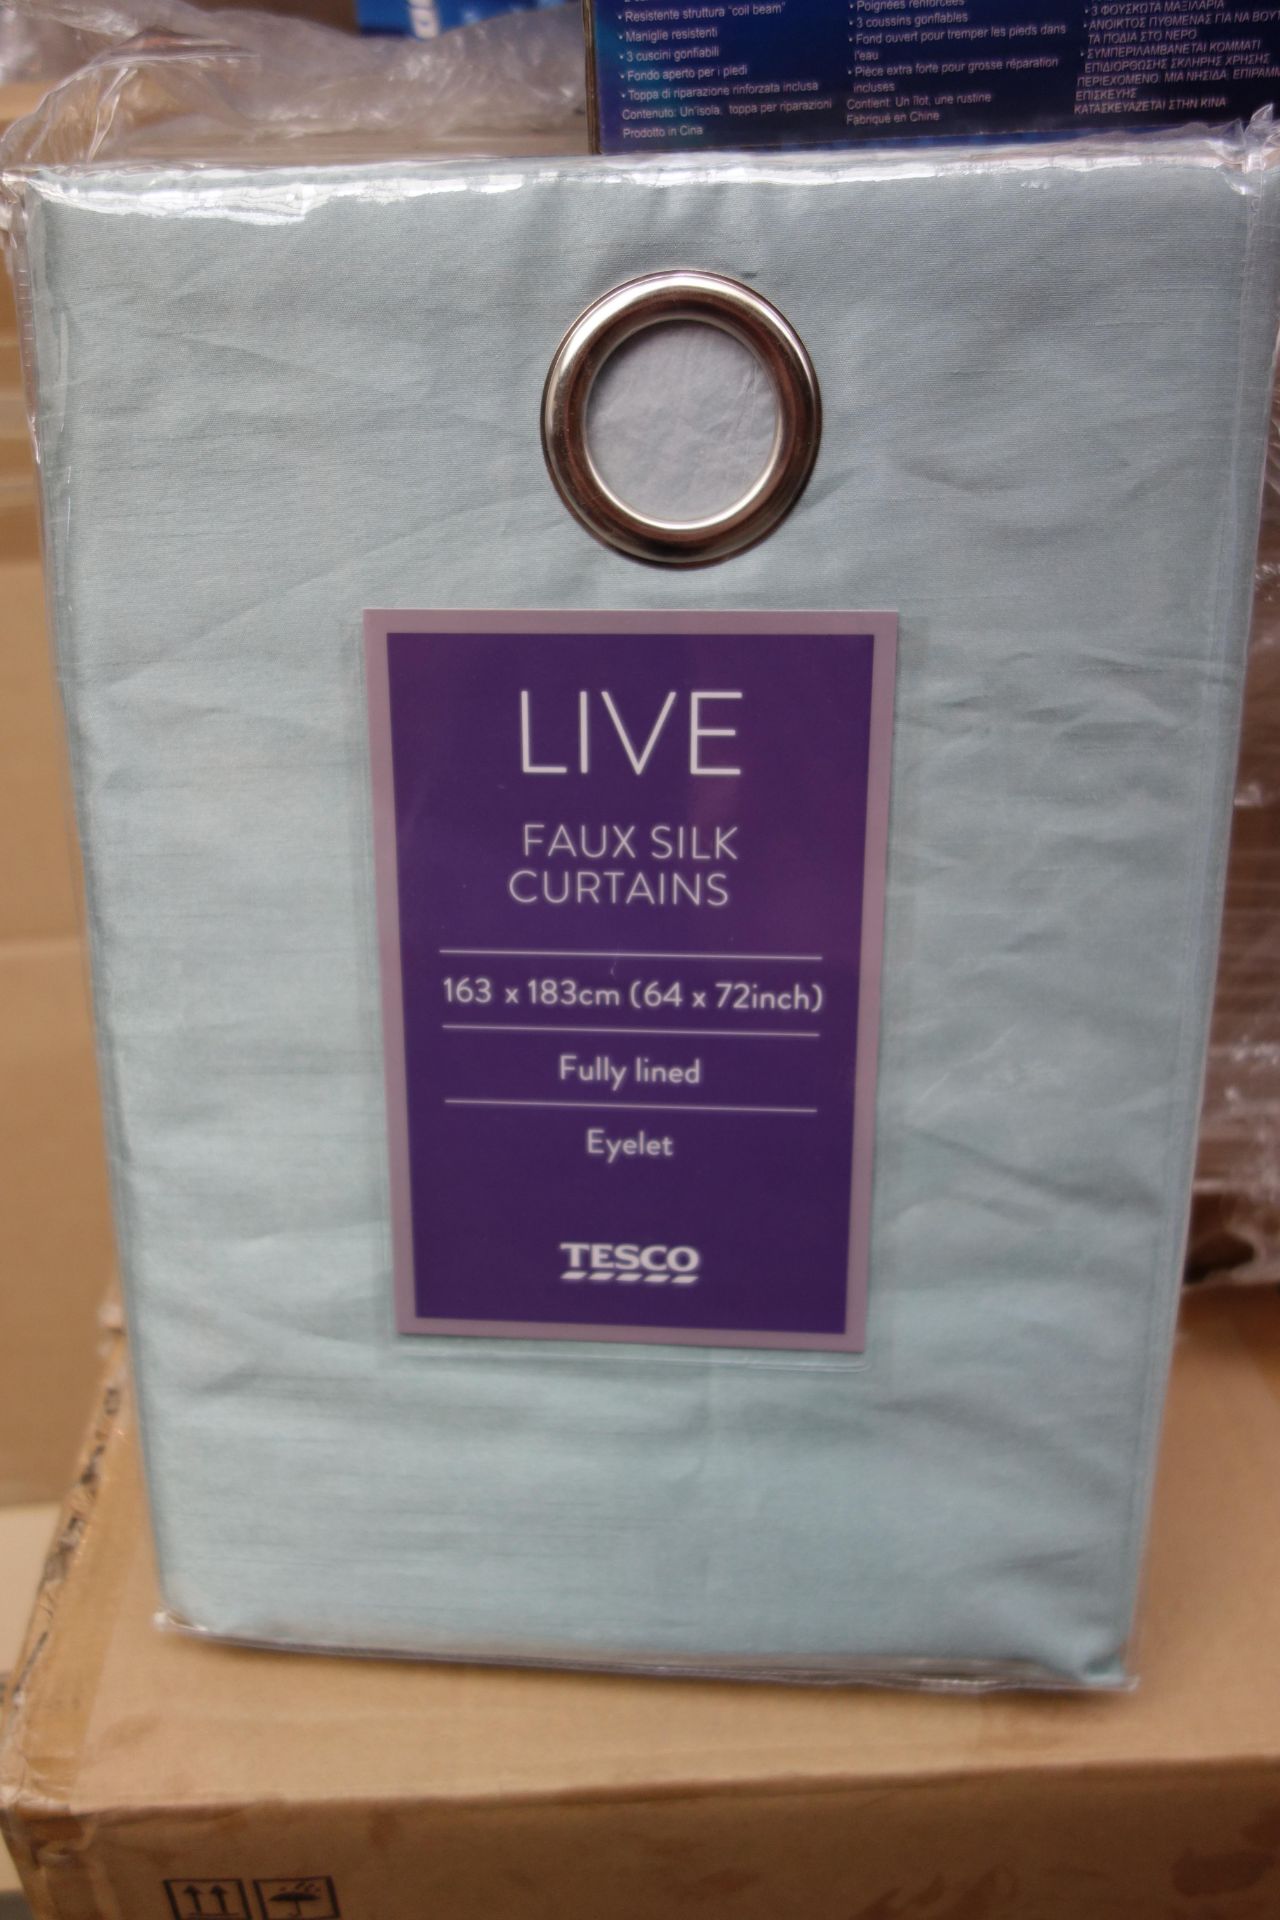 7 x Brand New - Tesco Live Faux Silk Curtains 64 x 72 Inch. Fully Lines. Eyelet.